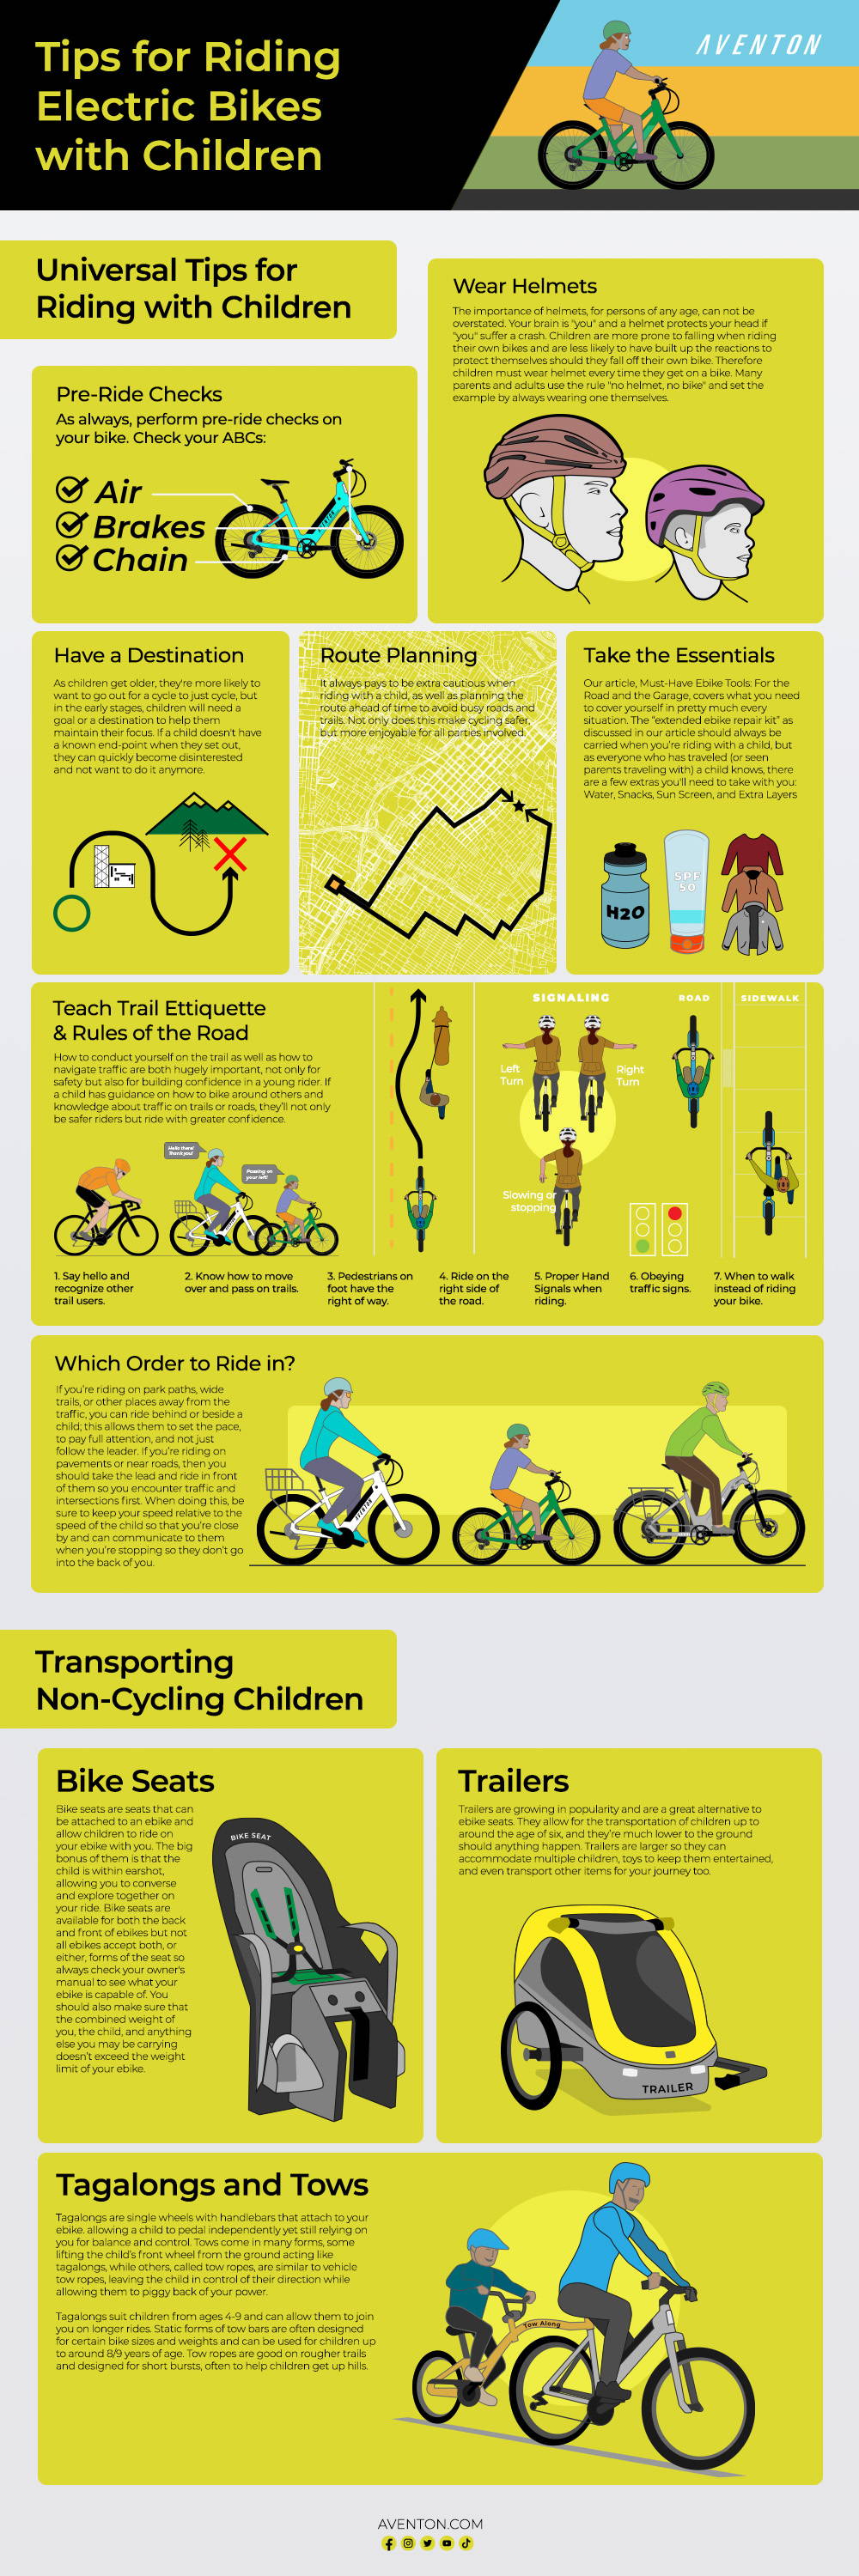 An overview of tips for riding electric bikes with children.